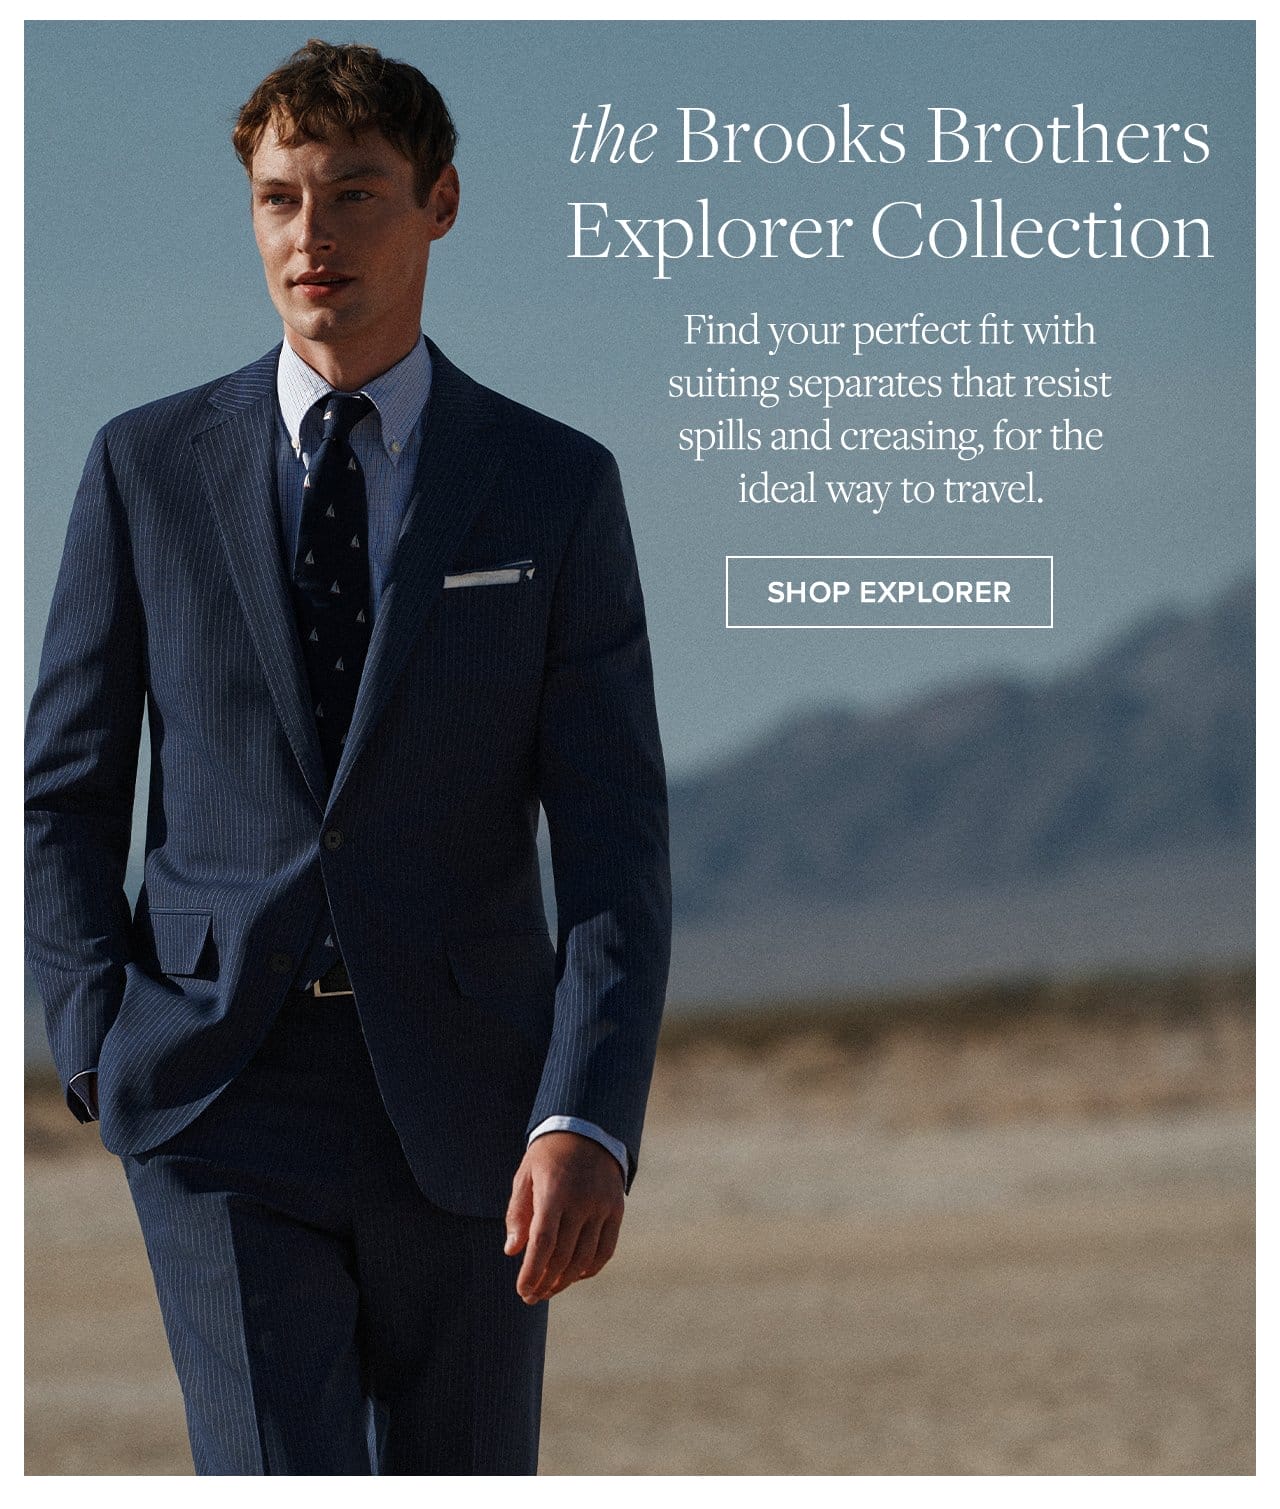 the Brooks Brothers Explorer Collection Find your perfect fit with suiting separates that resist spills and creasing, for the ideal way to travel. Shop Explorer